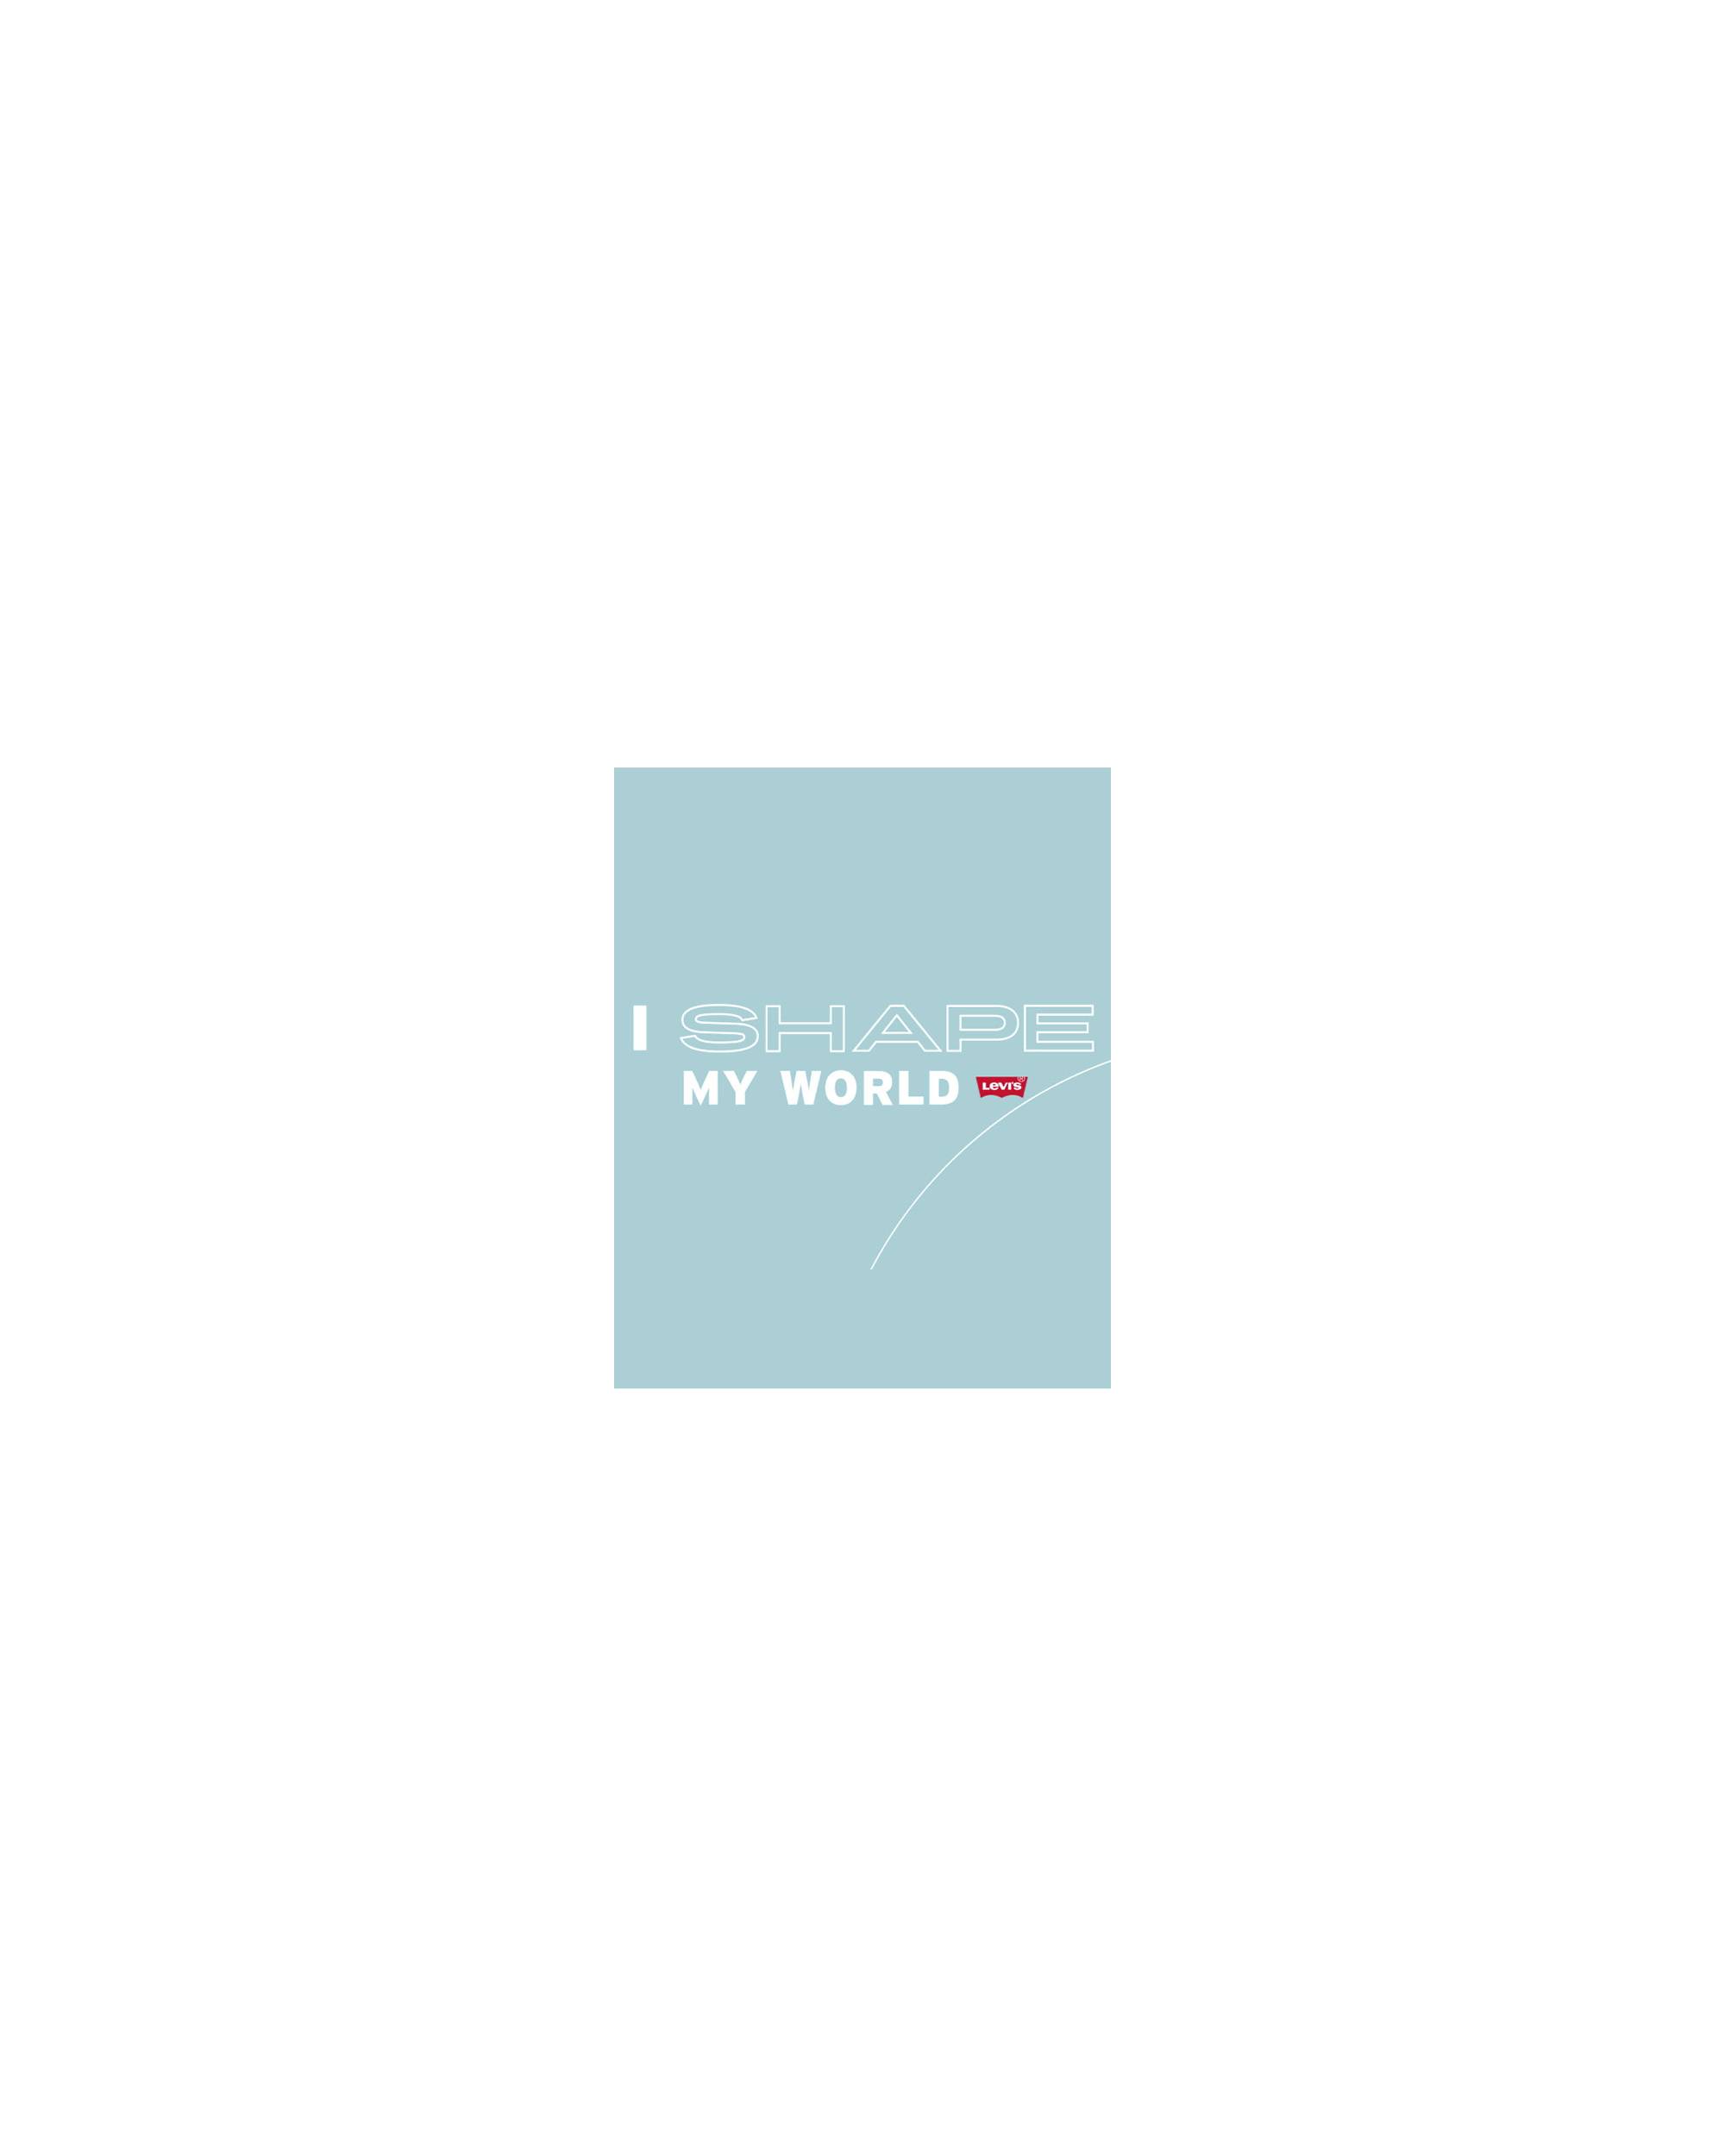 Scrolling "I SHAPE MY WORLD" text moving across a blue background.